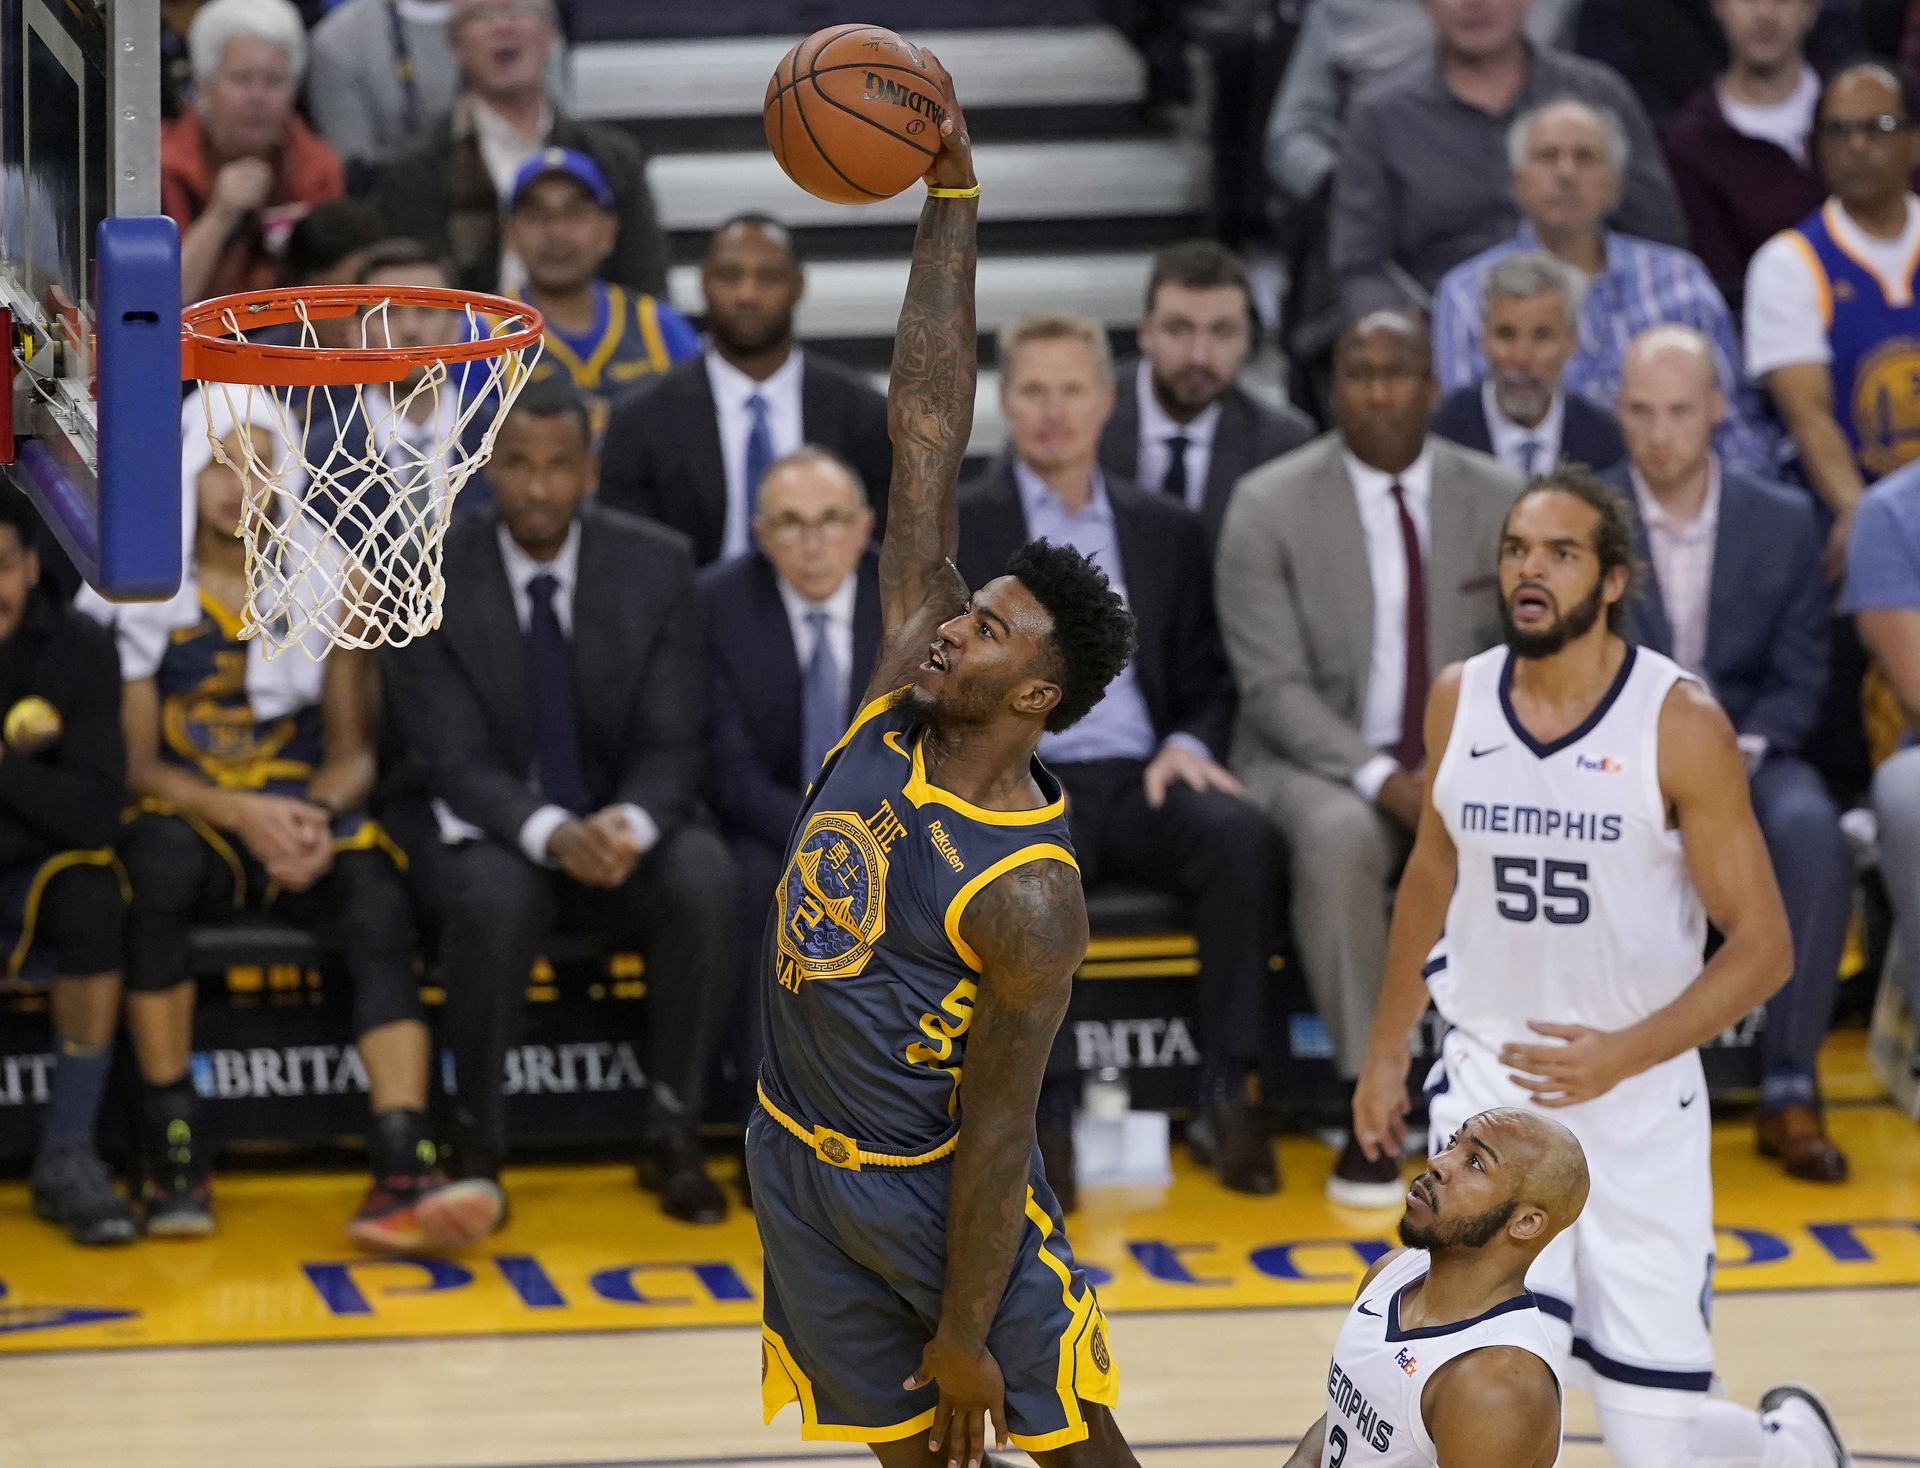 epa07238010 Golden State Warriors forward Jordan Bell (L) goes to the basket for a slam dunk attempt against the Memphis Grizzlies  during the first half of their NBA game at Oracle Arena in Oakland, California, USA, 17 December 2018.  EPA/JOHN G. MABANGLO SHUTTERSTOCK OUT